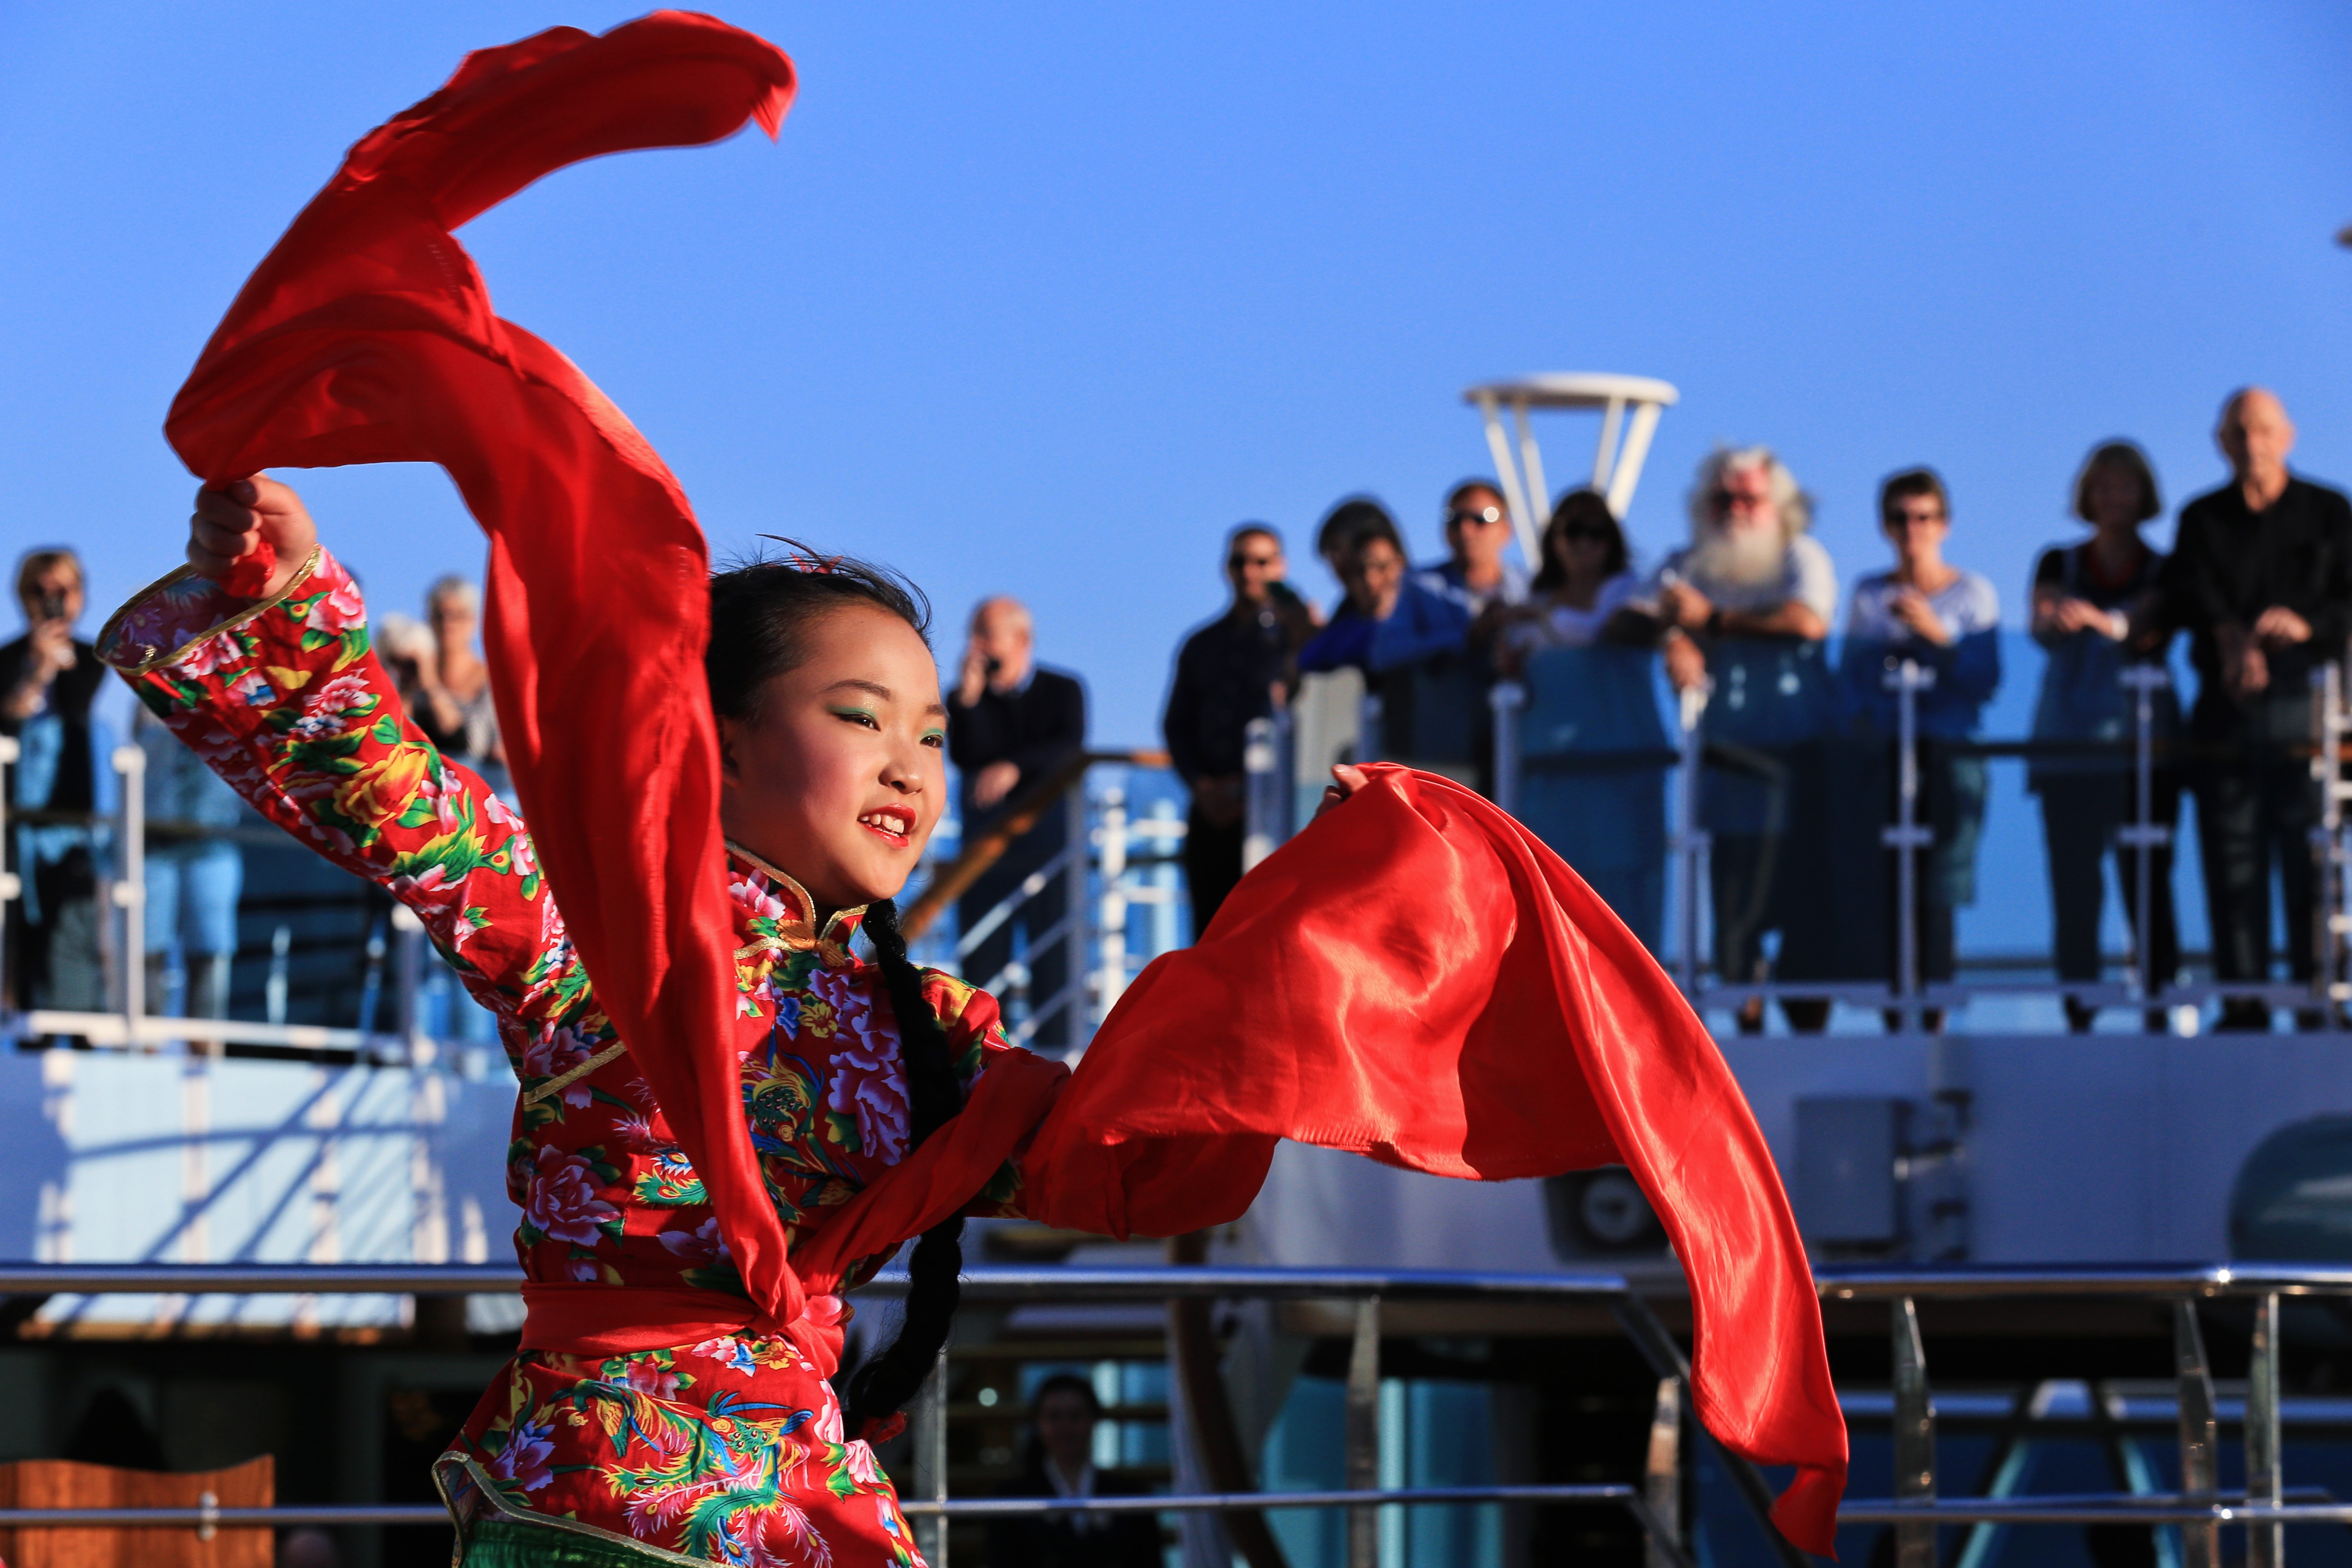 A girl performs a folk dance during the opening ceremony of the “Silk Road Stories” programme on board the Majestic Princess cruise ship in Rome, Italy, on Sunday. Photo: Xinhua